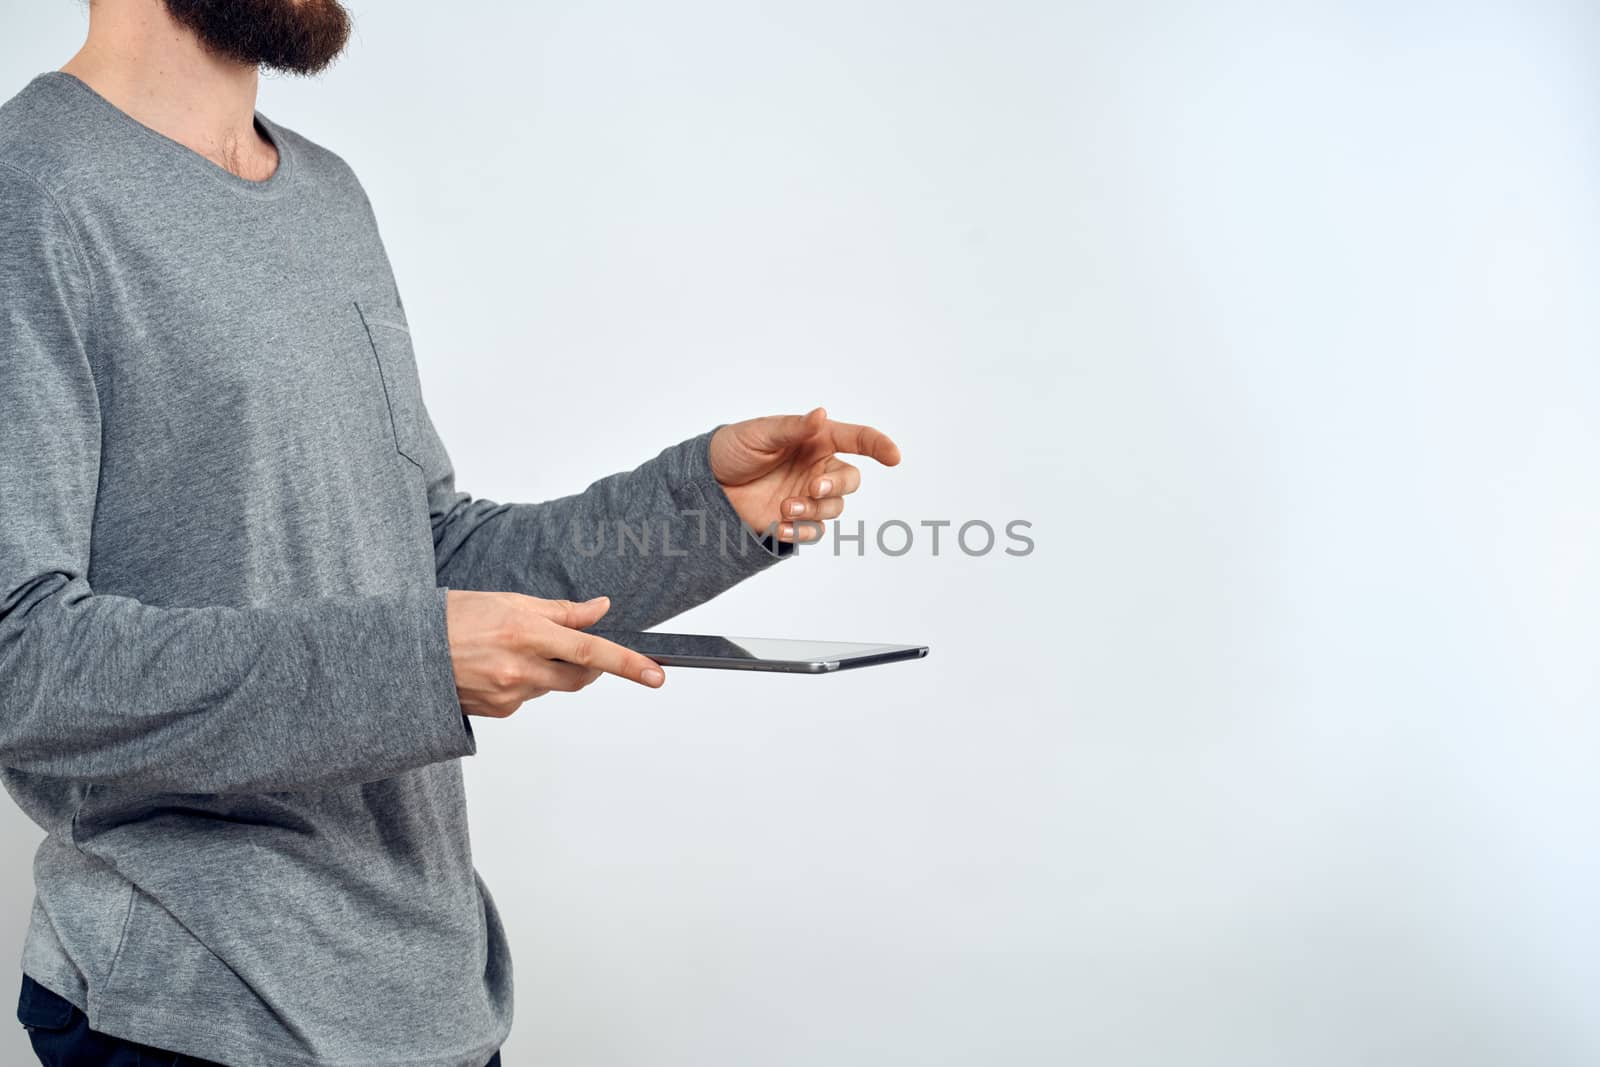 Man with tablet in hands technology lifestyle internet communication work light background cropped view by SHOTPRIME